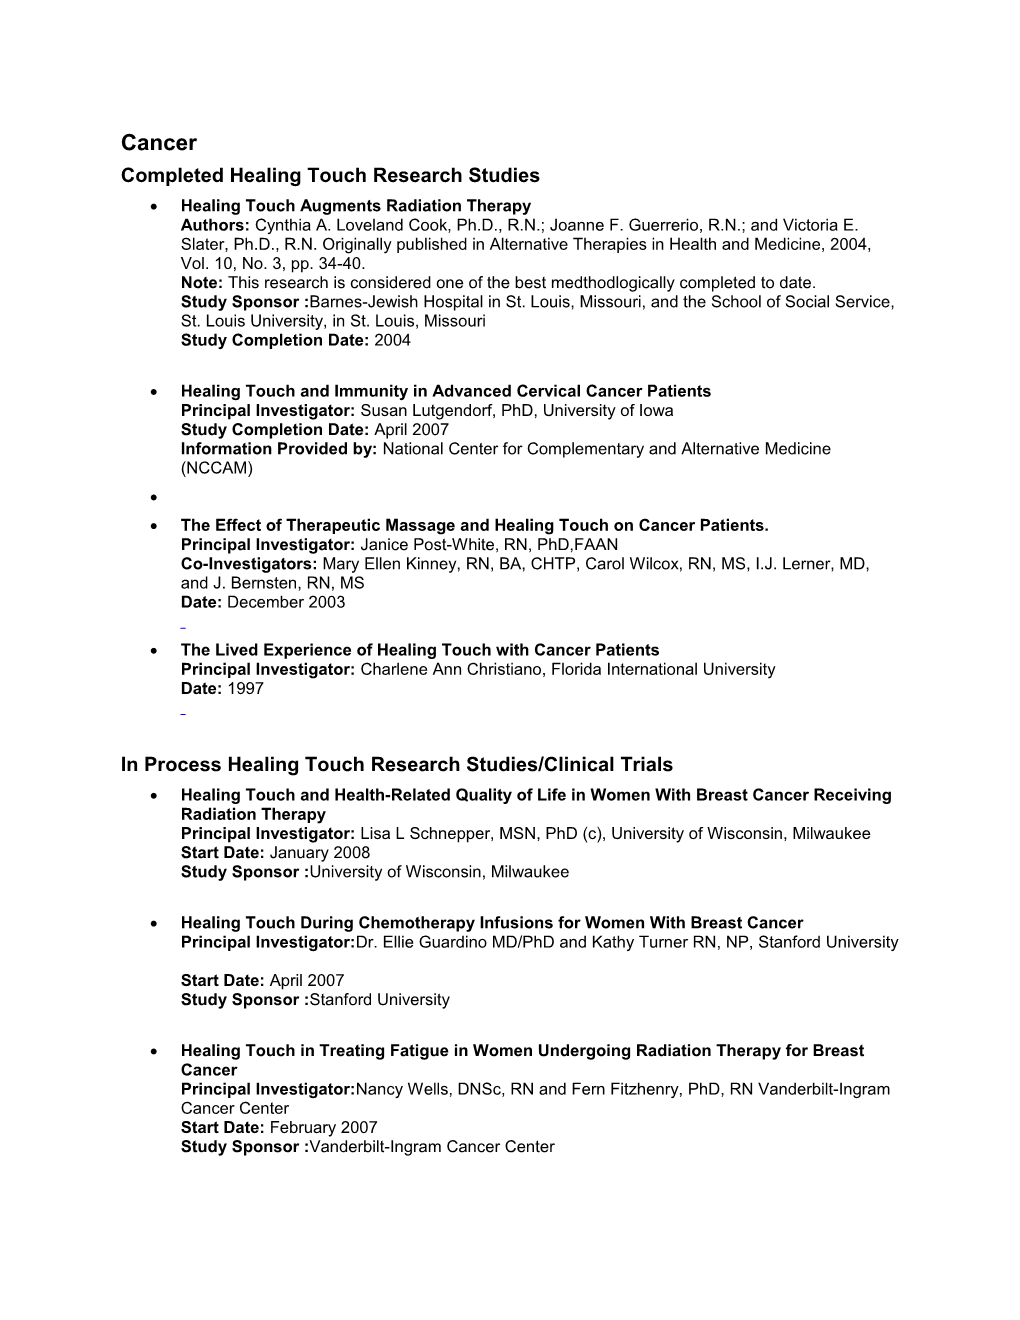 Completed Healing Touch Research Studies